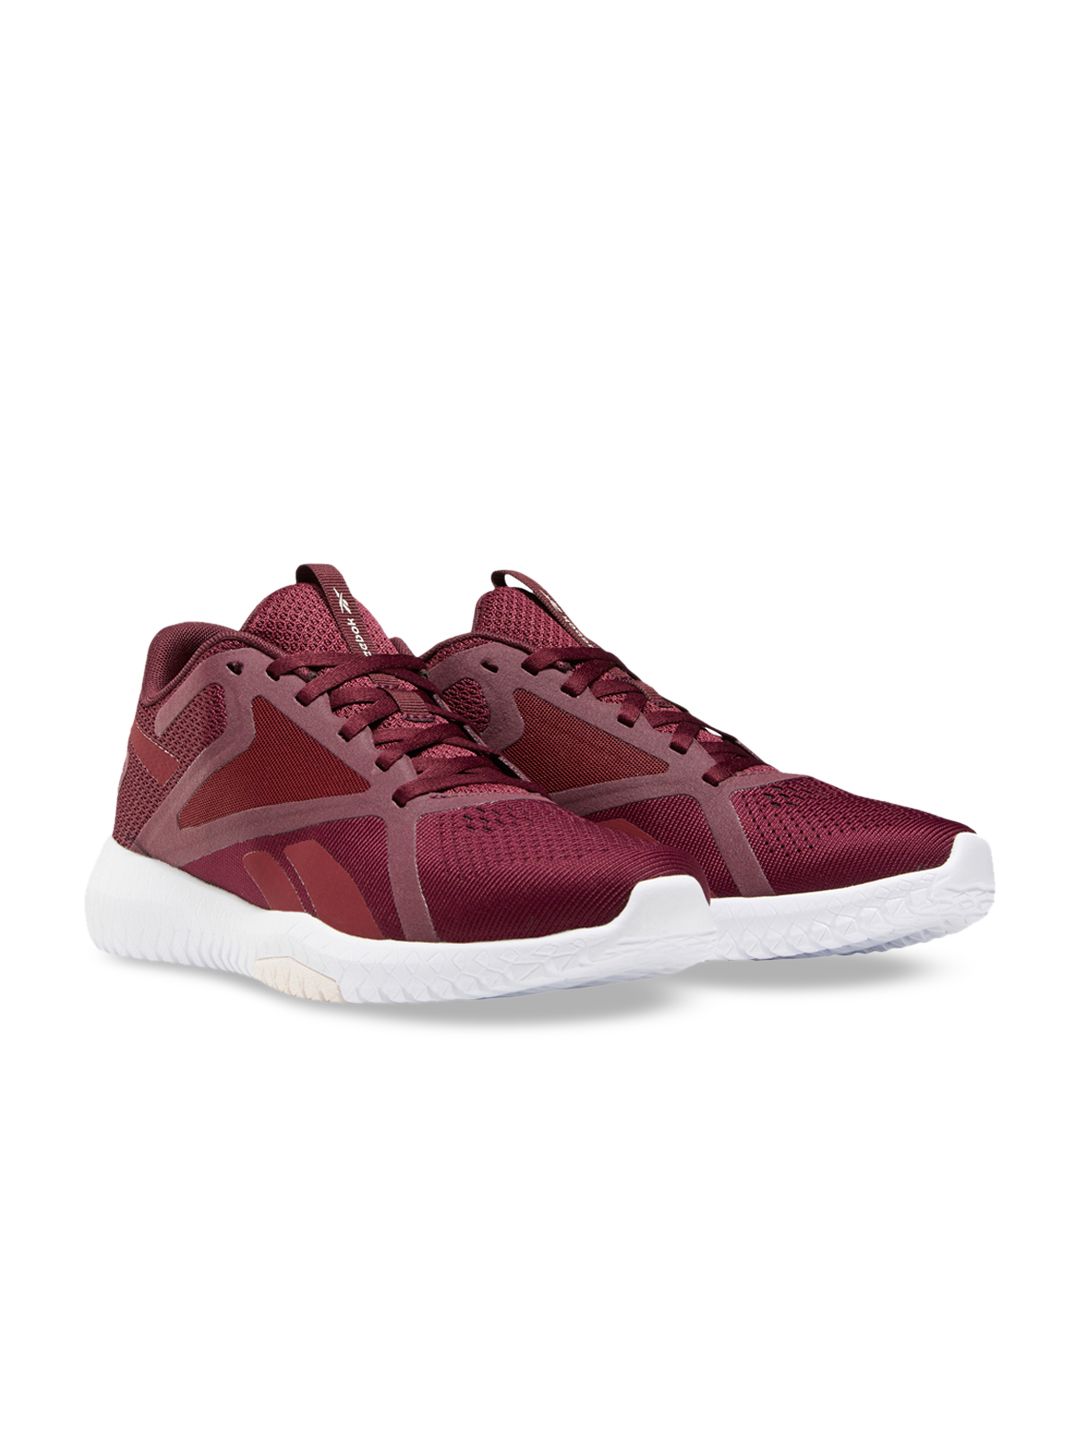 Reebok Women Maroon Mesh Training or Gym Non-Marking Shoes Price in India